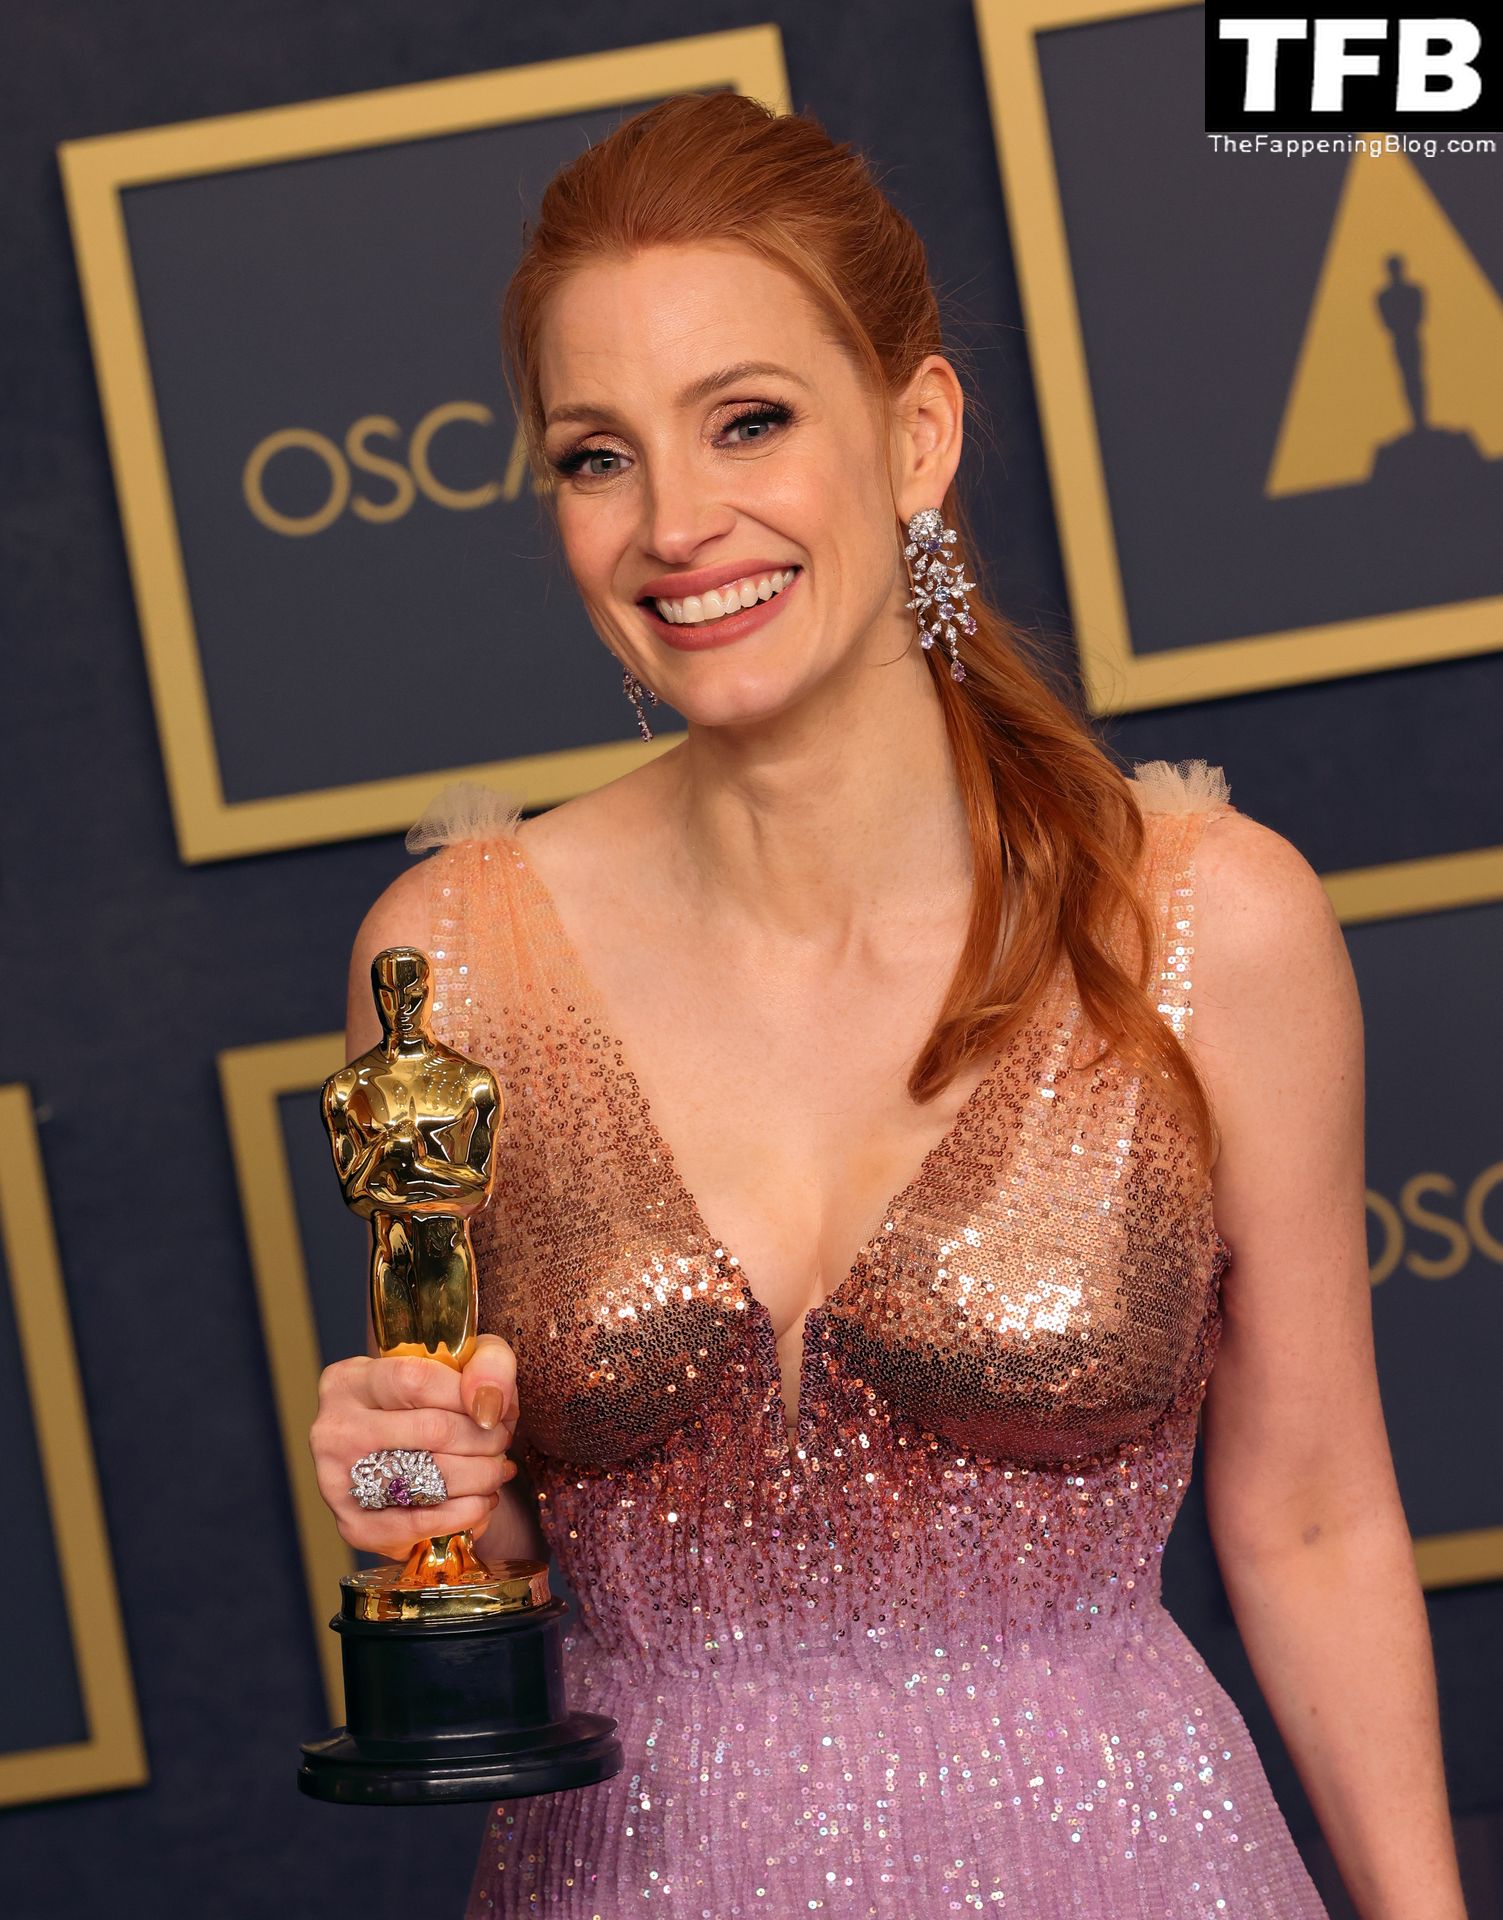 Jessica-Chastain-Sexy-The-Fappening-Blog-95.jpg